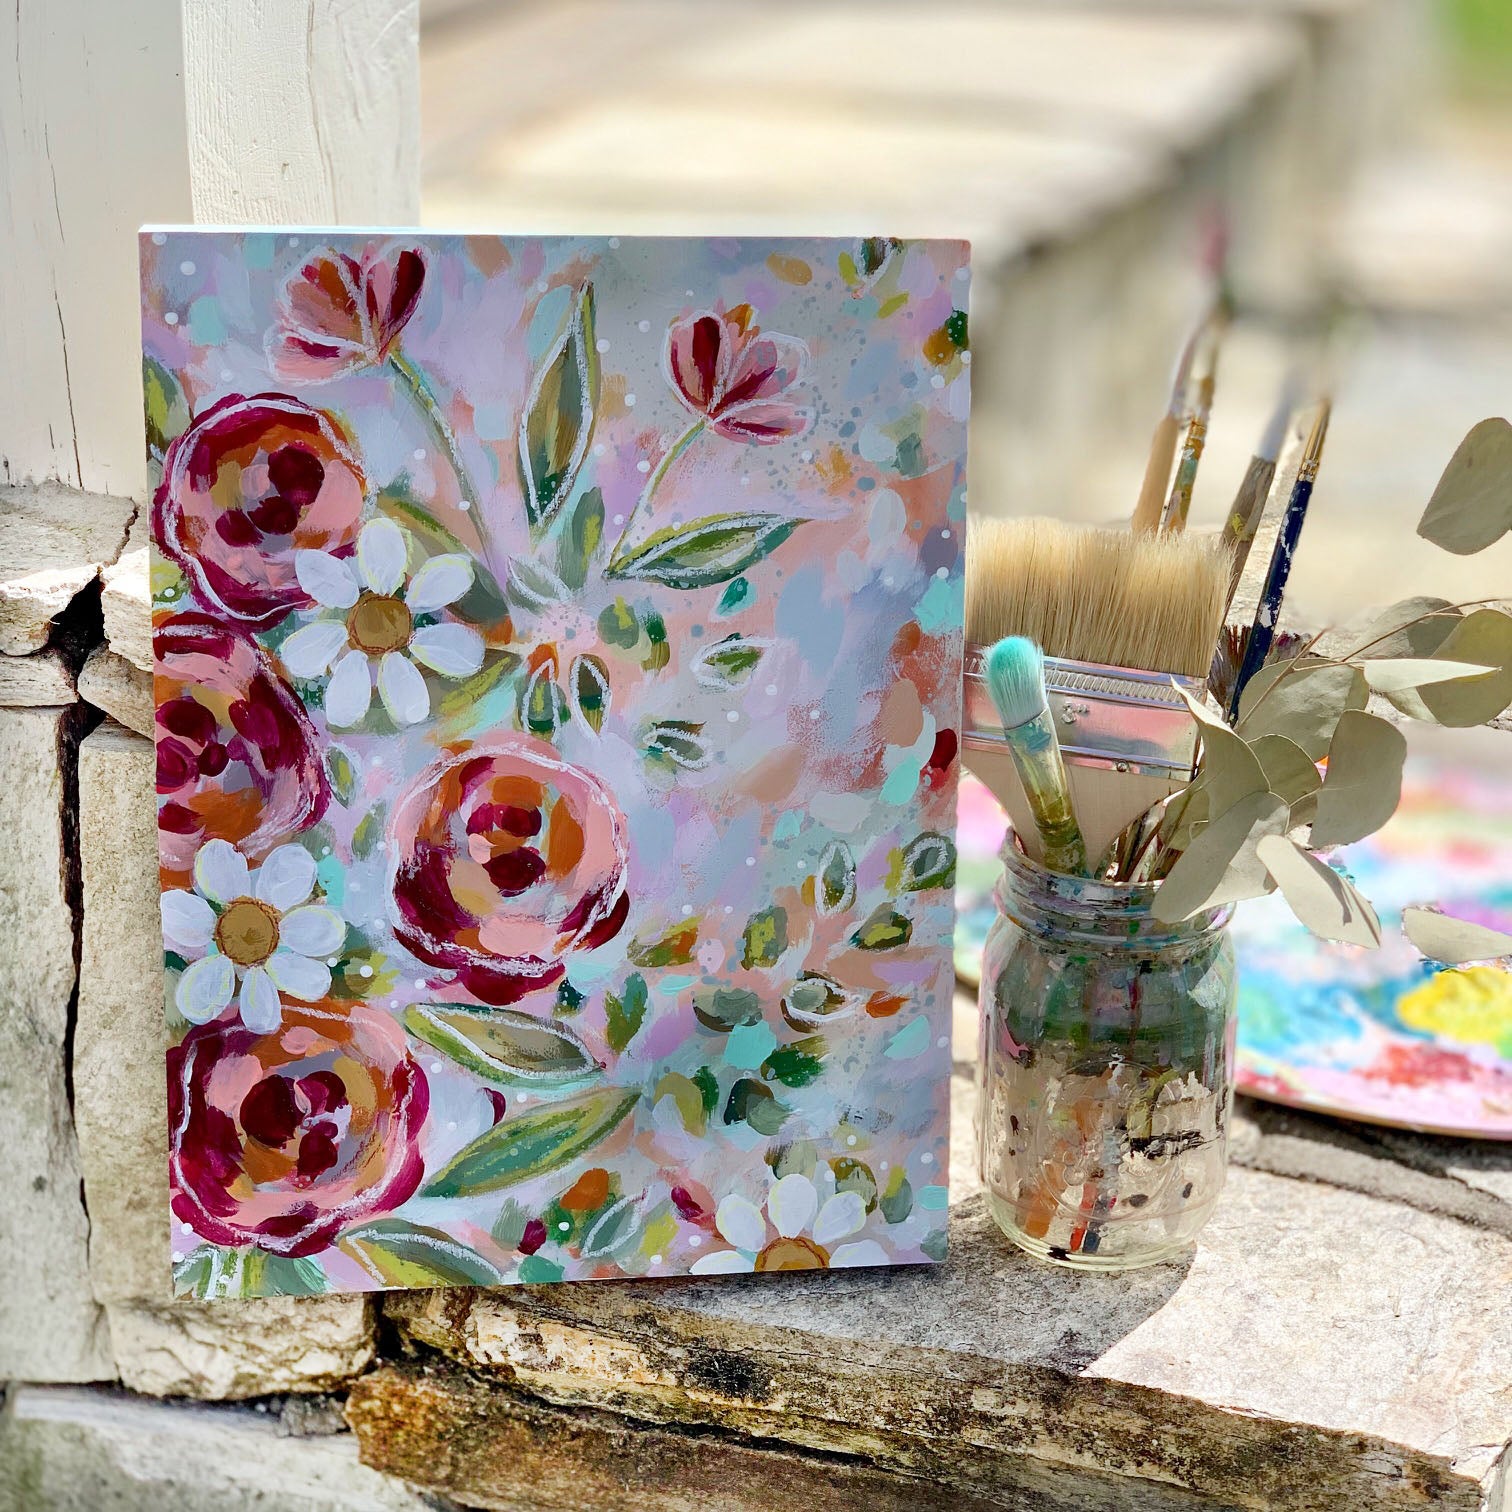 New Spring Floral Mixed Media Painting on 9x12 inch wood panel - Bethany Joy Art